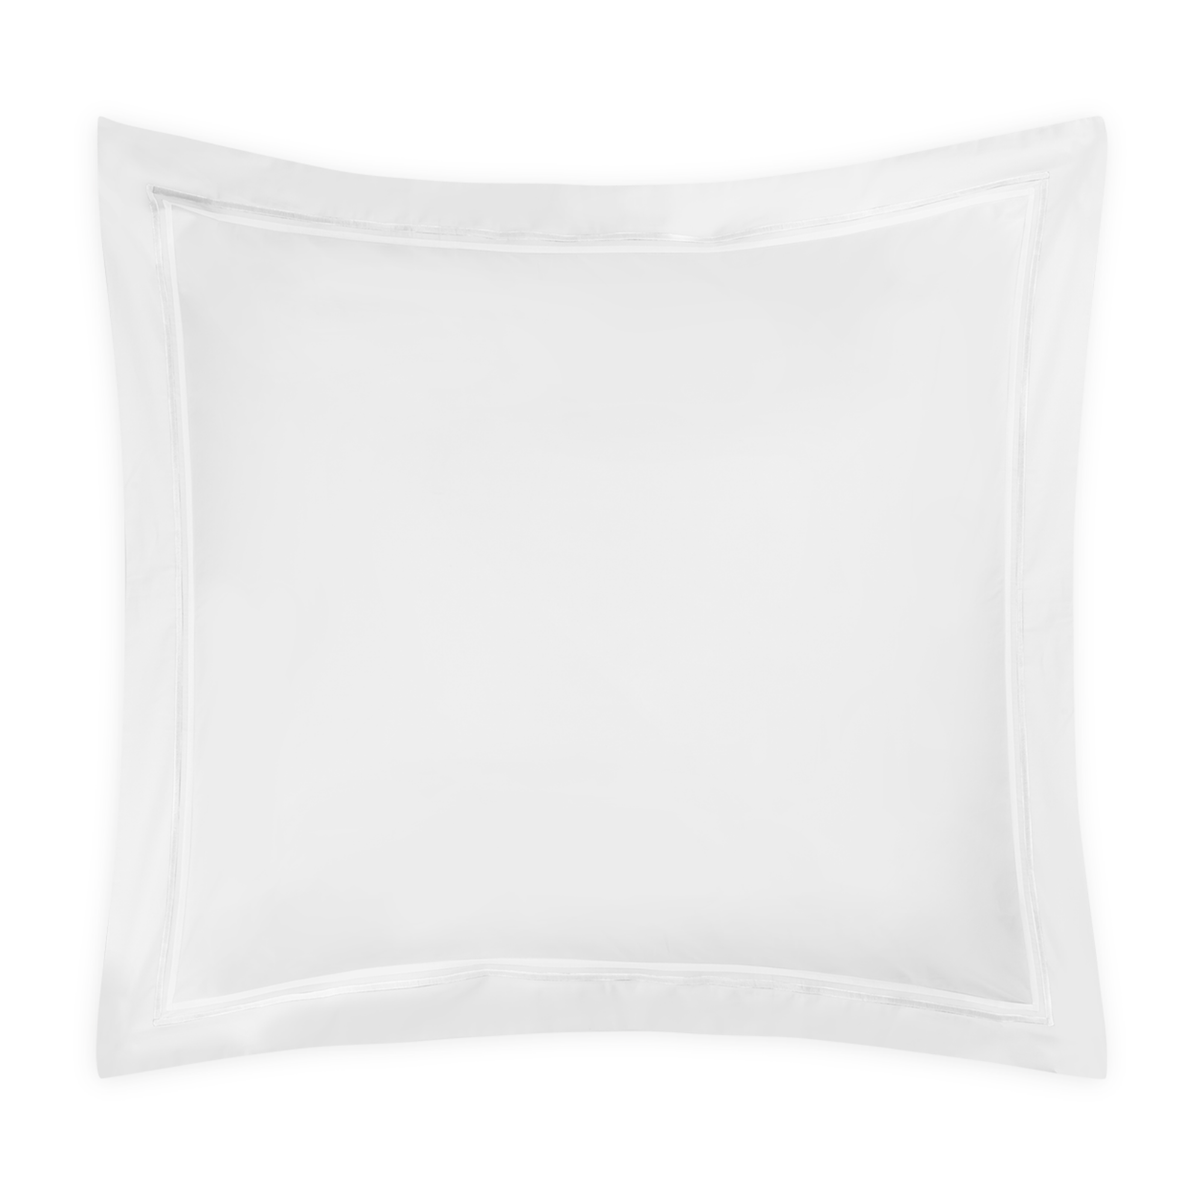 Pair of Pillowcases of Matouk Essex Bedding Collection in White Color